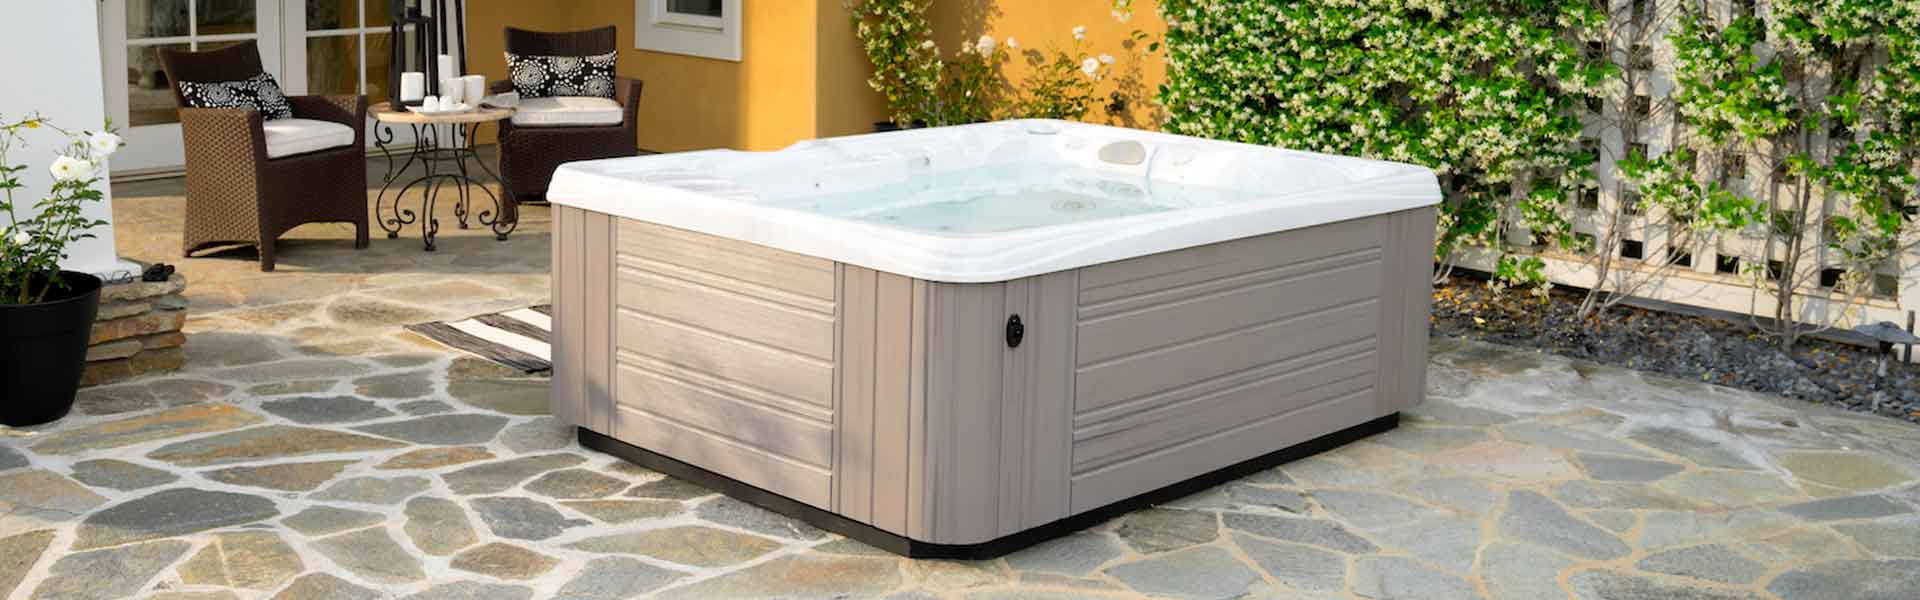 10 of the Most Reliable Hot Tubs – How to Be Sure You’re Getting the Best